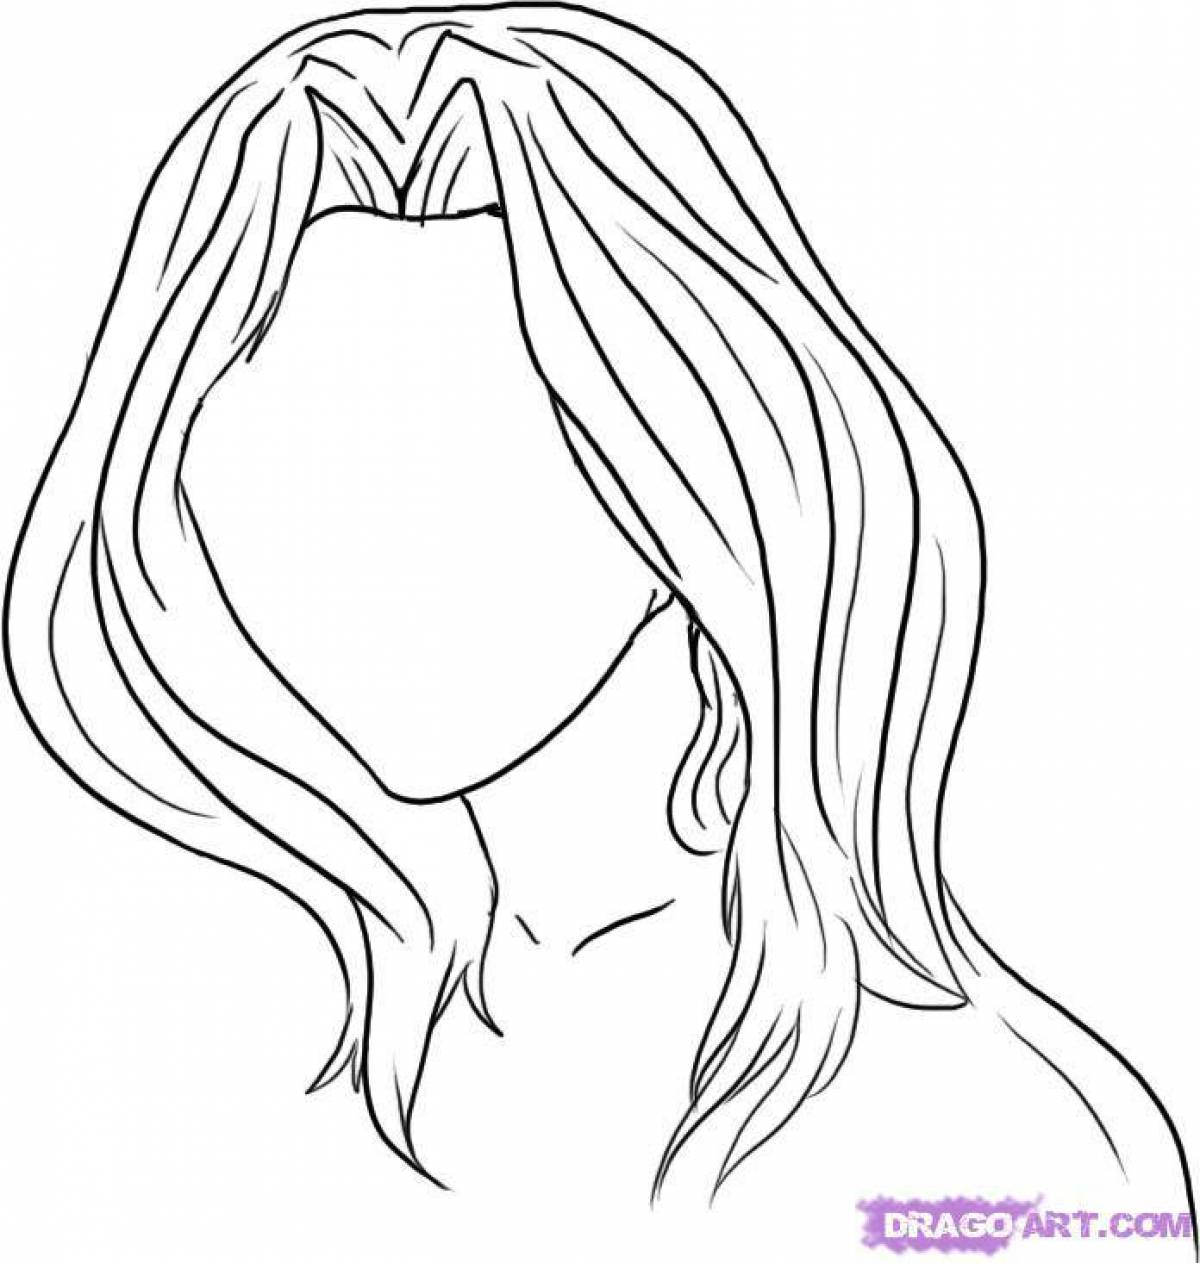 Bright hair coloring page